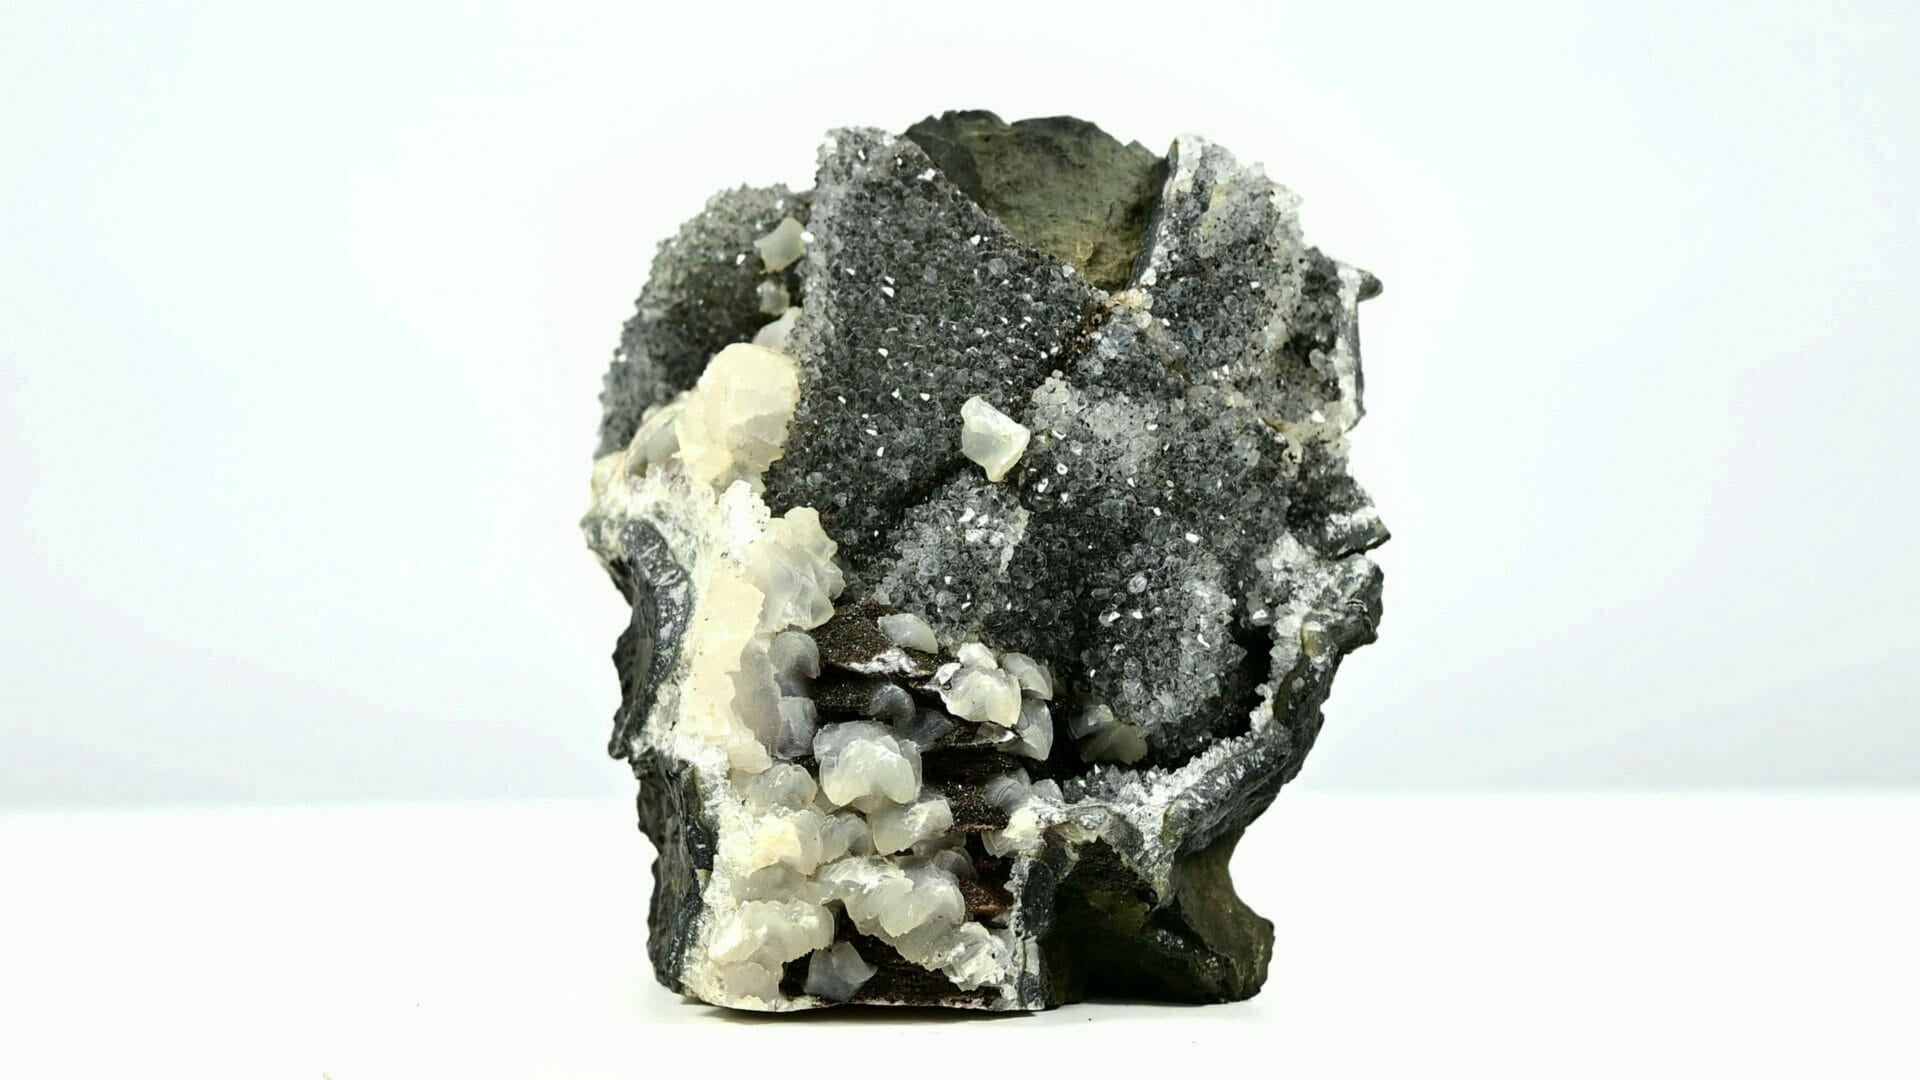 Black druzy crystals with multiple calcite formations and second generations front